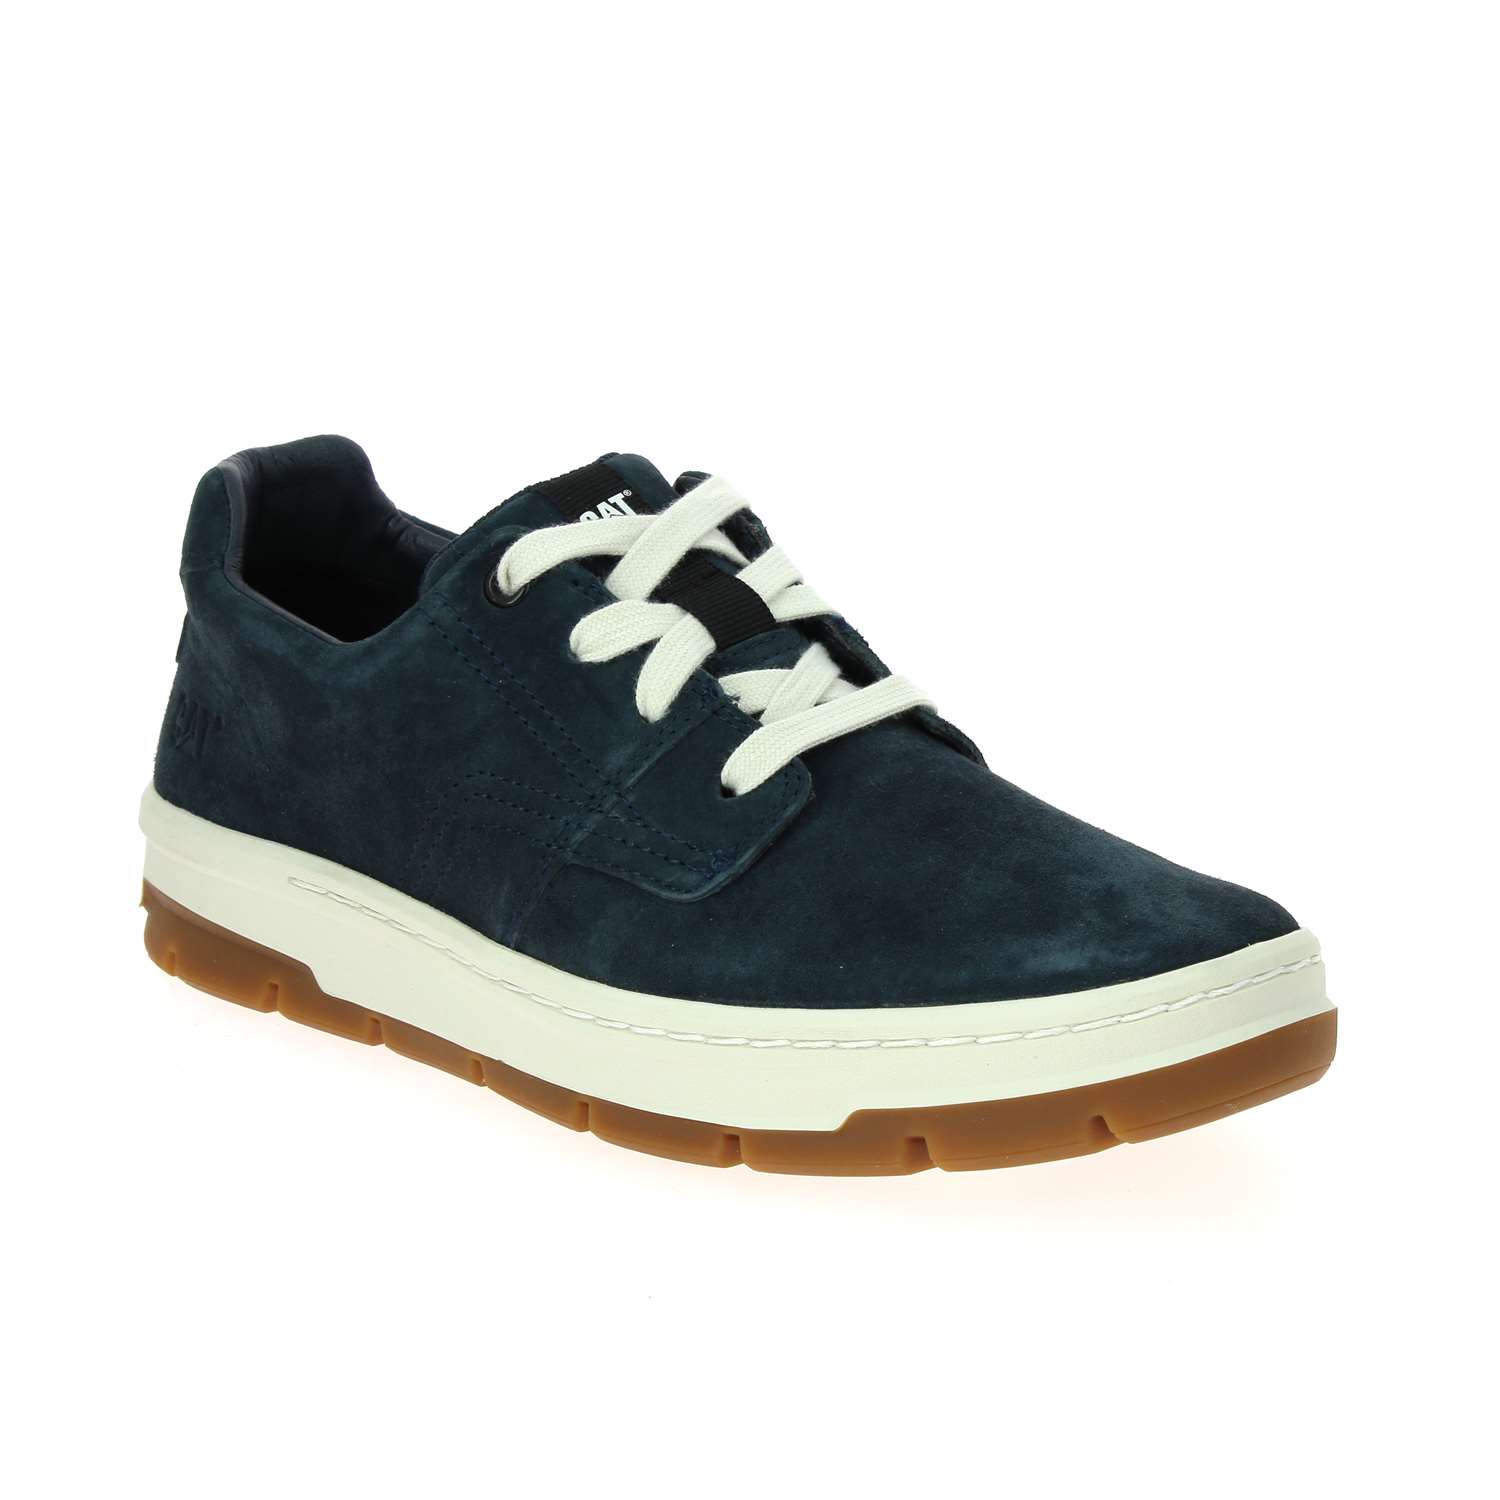 Chaussures Caterpillar pour Homme